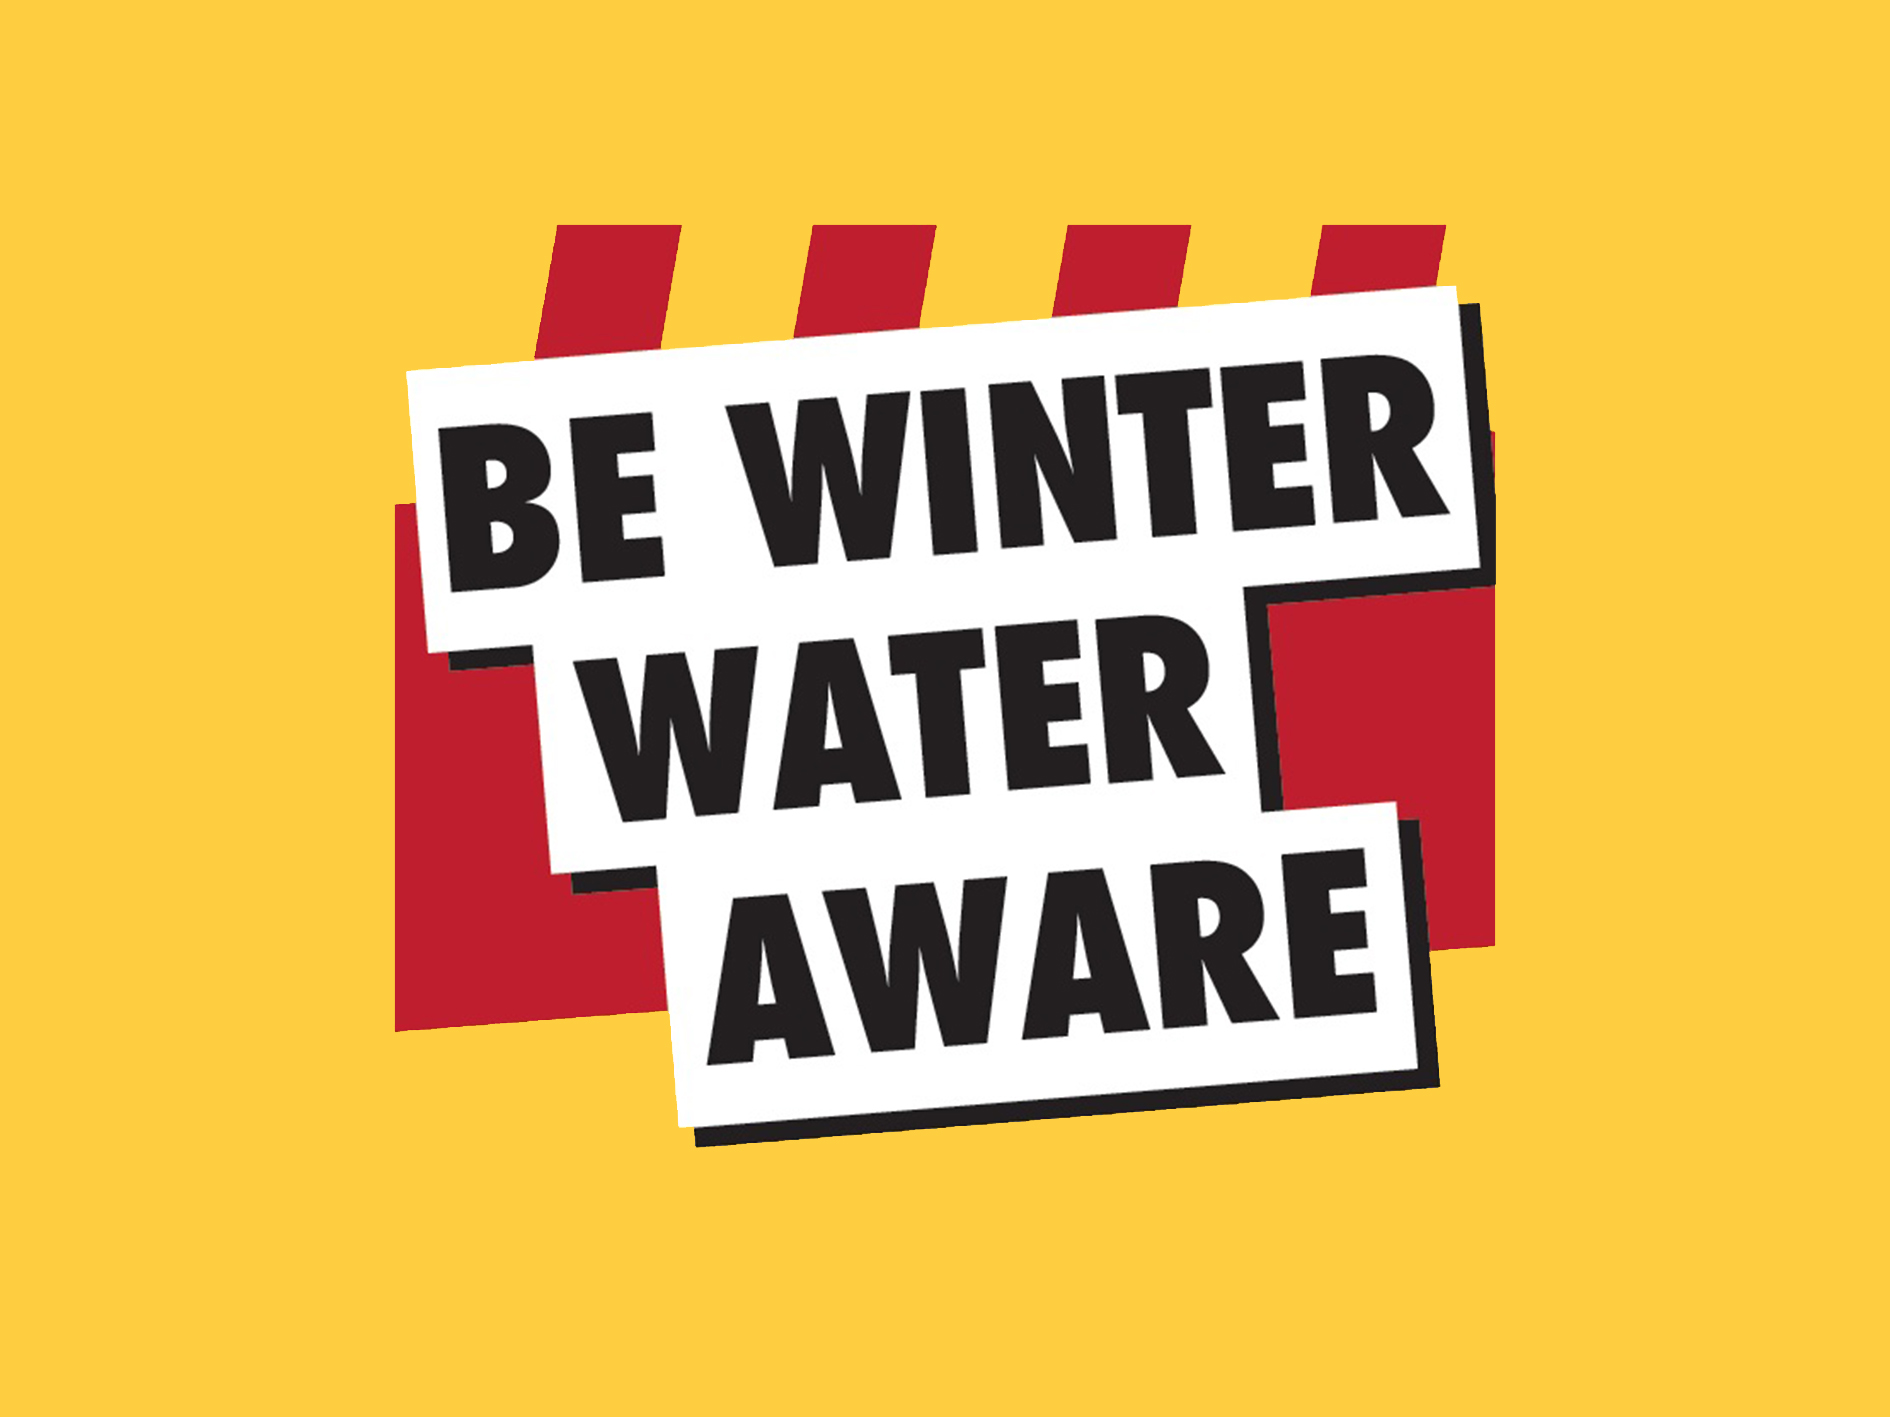 Section on be winter water aware